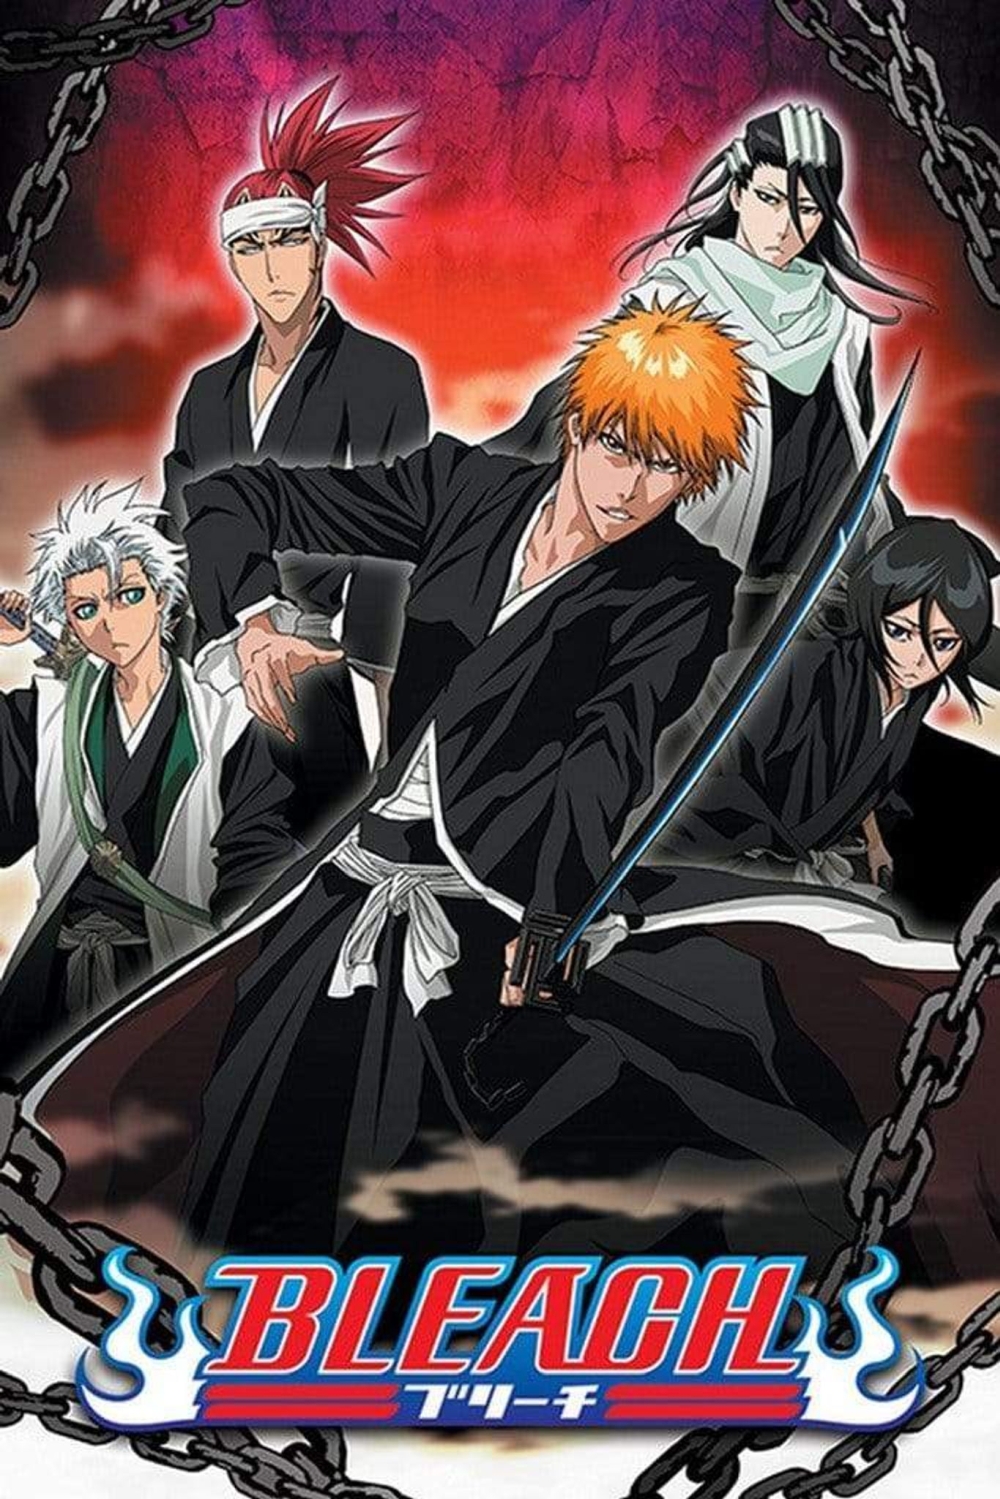 Bleach - Chained - 91,5x61 Poster